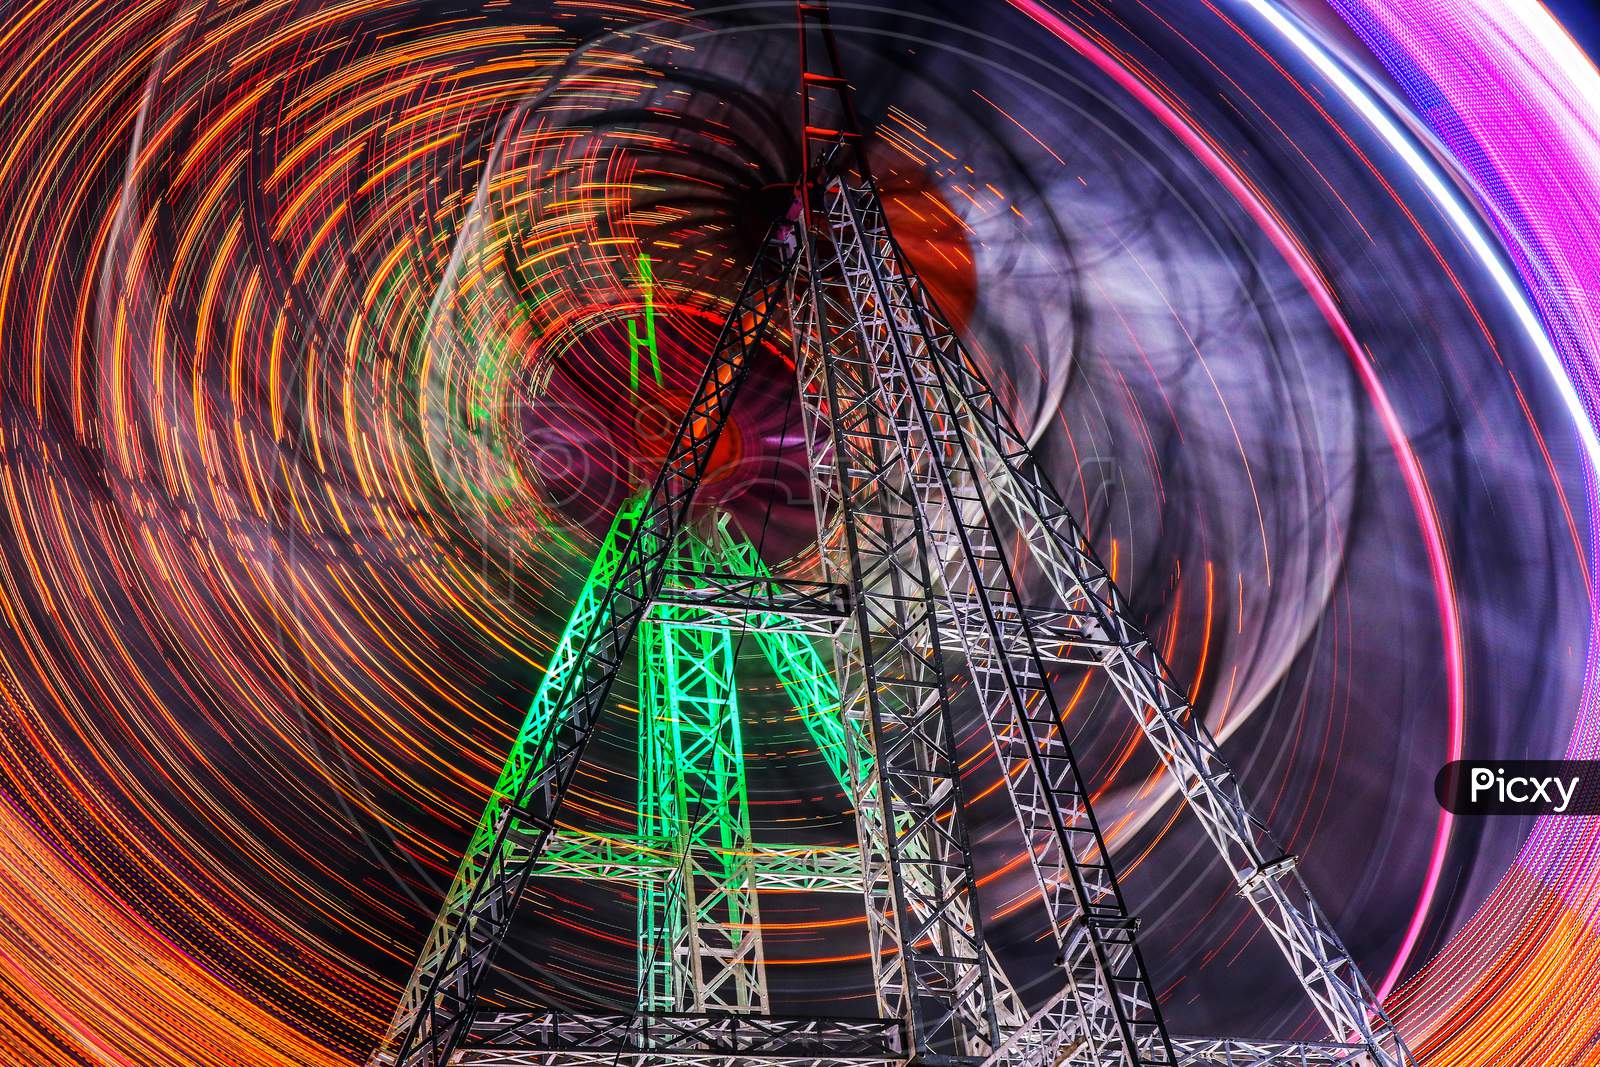 Long exposure of a giant wheel Nampally exhibition